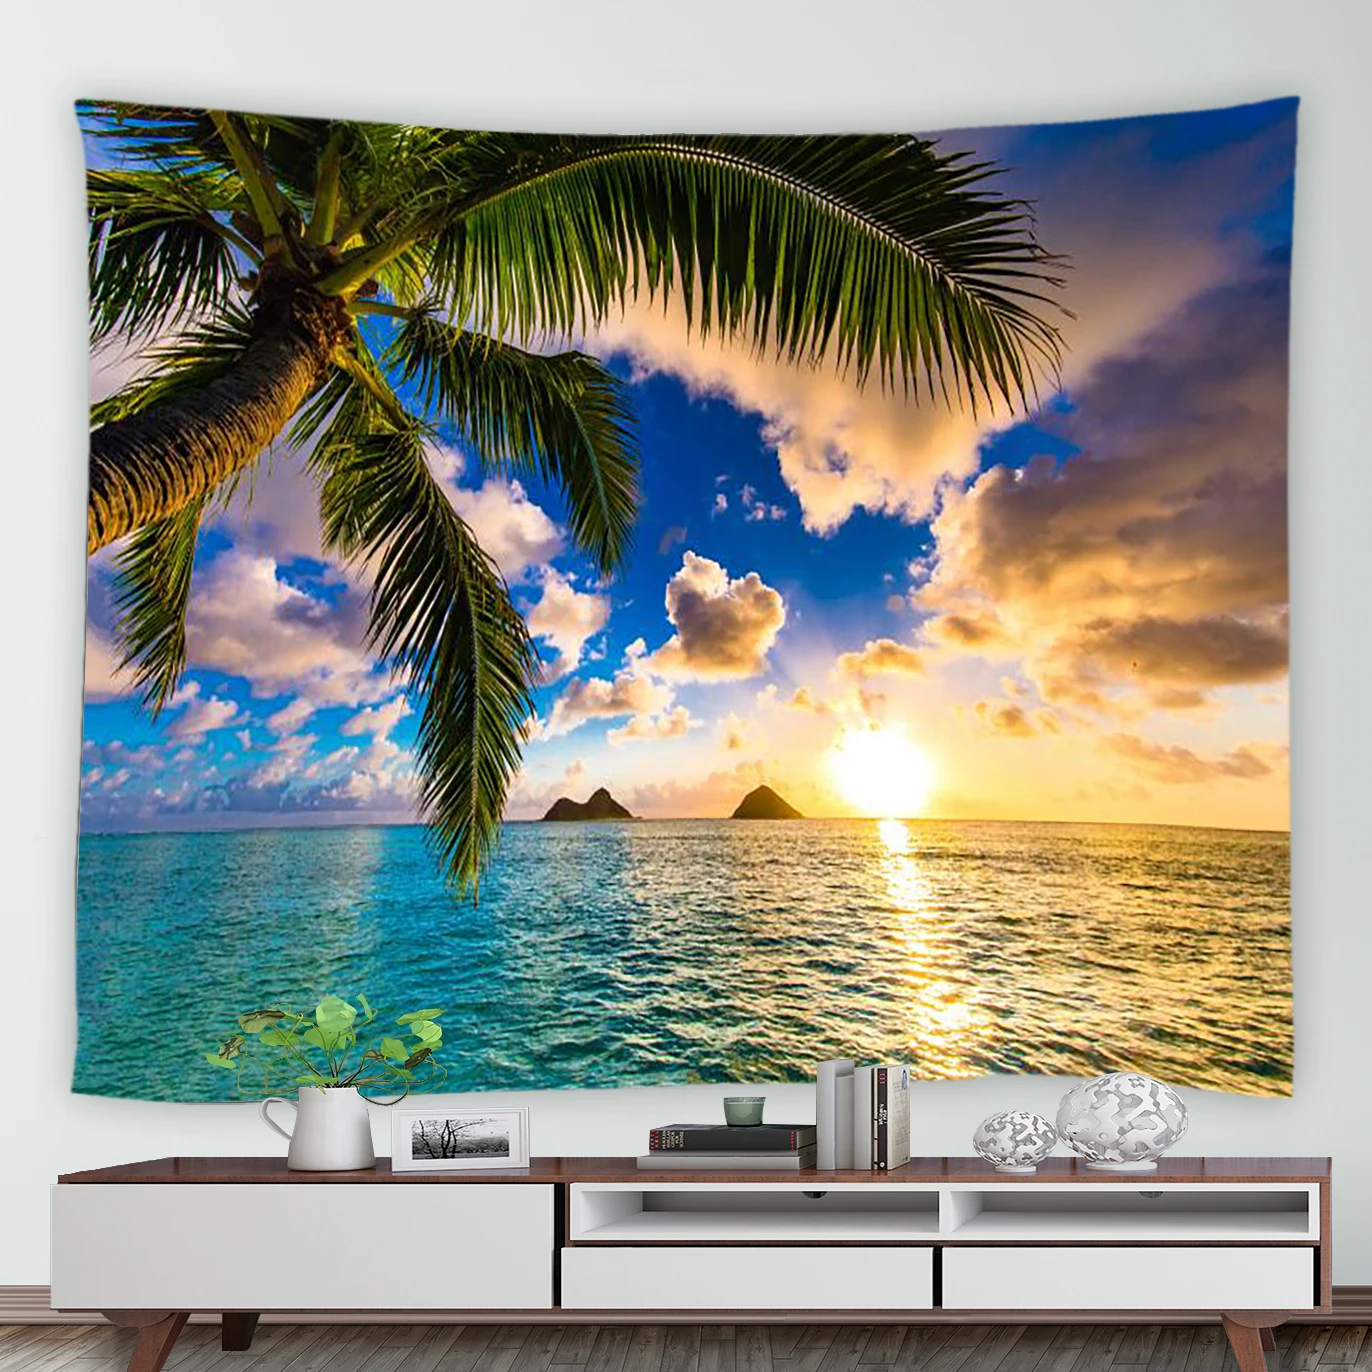 

Dusk Ocean Palm Tree Tapestry Blue Sea Natural Landscape Tapestries 3D Hawaii Scenery Dorm Wall Hanging Picnic Mat Beach Blanket